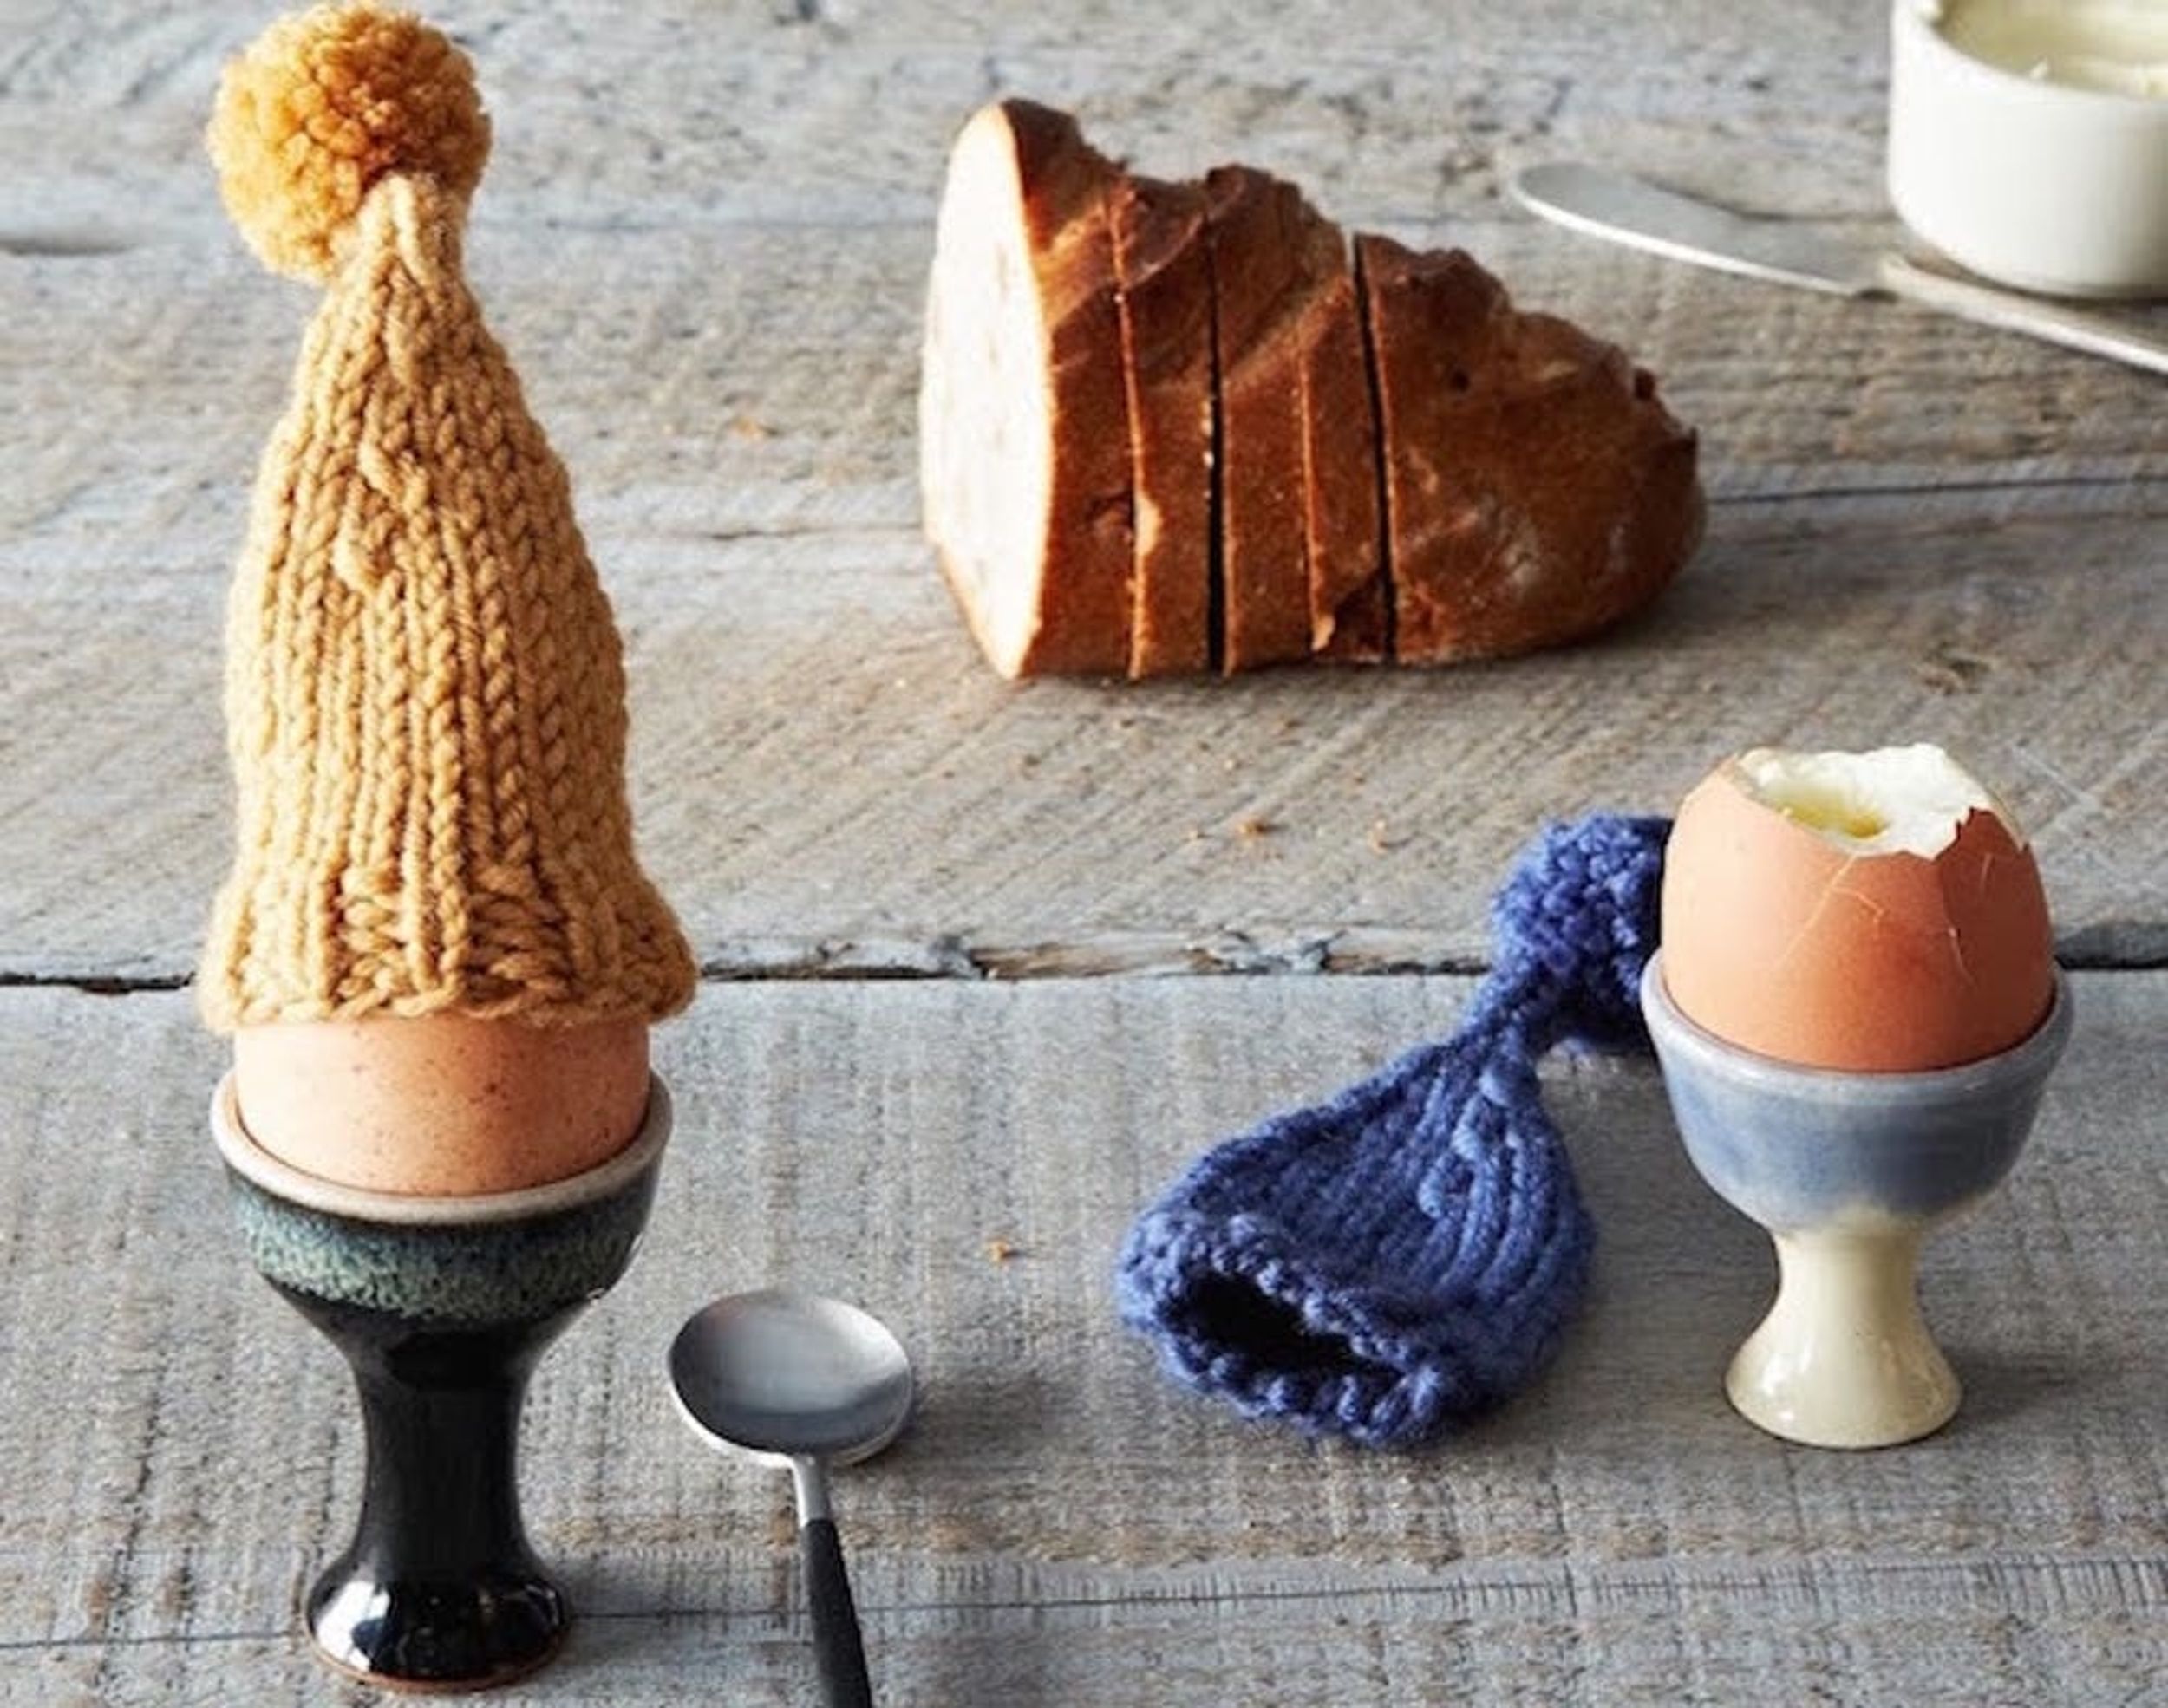 Bon Appetit! 31 Gifts for Your Favorite Foodies